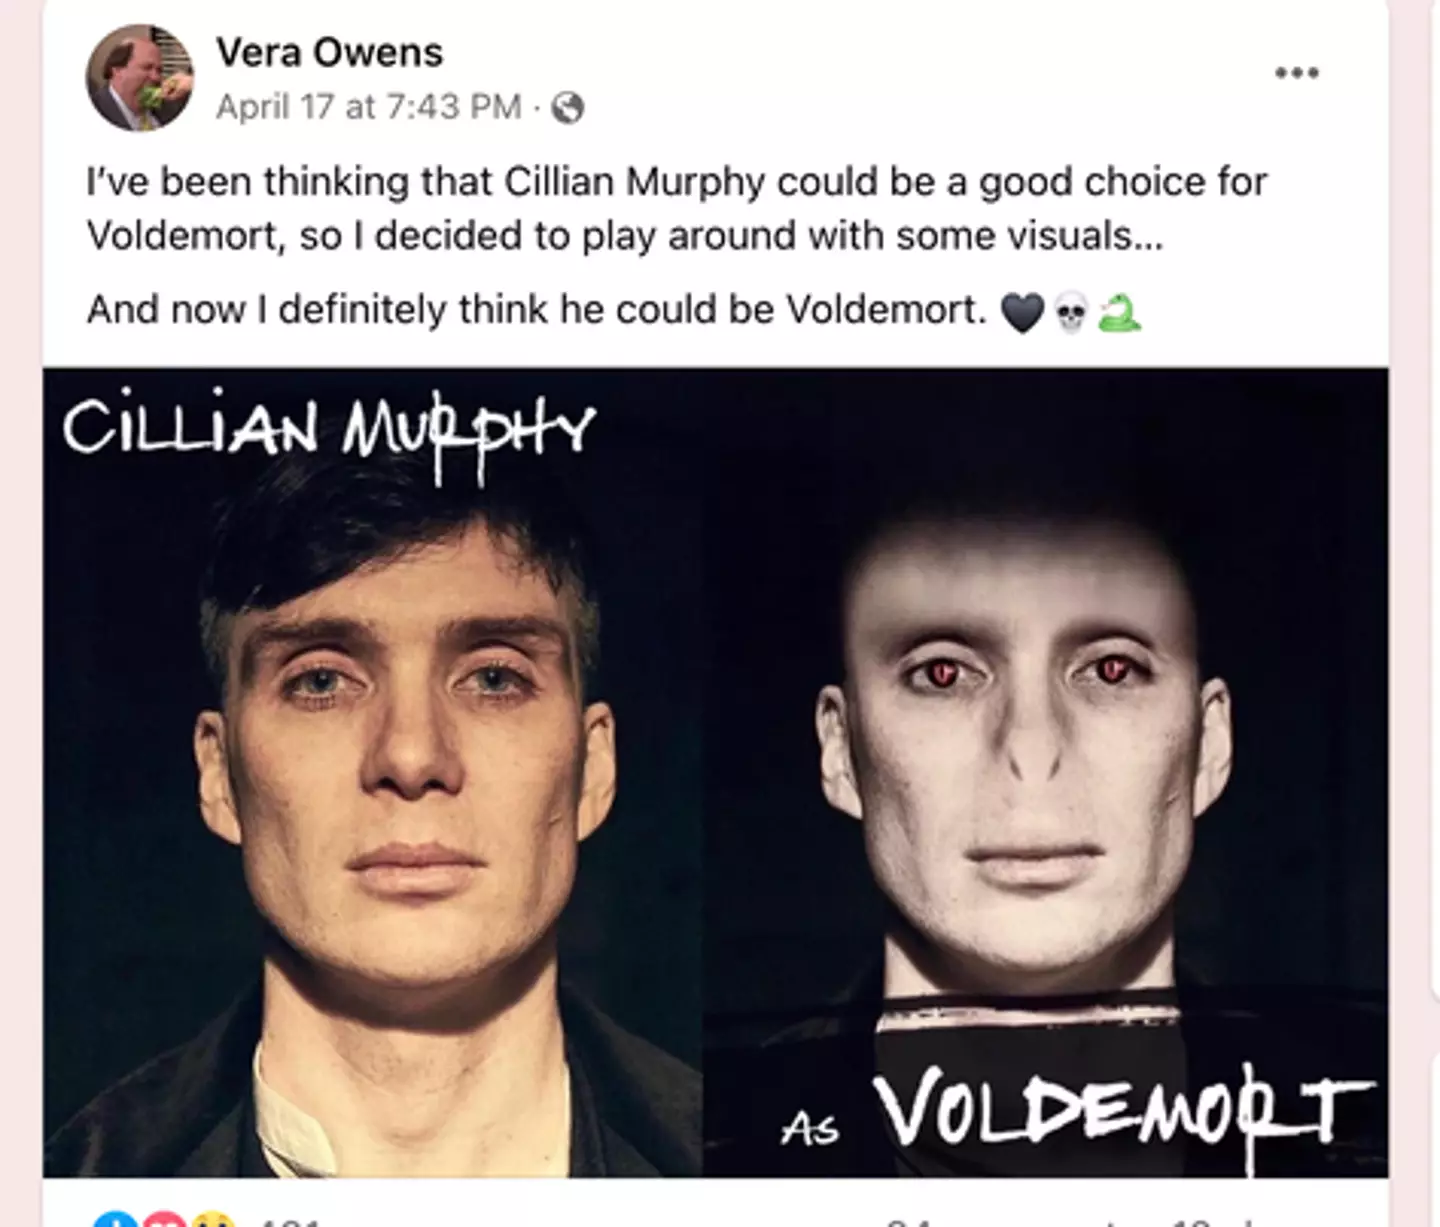 Vera Owens reckons Cillian could be a good casting choice for Voldemort.